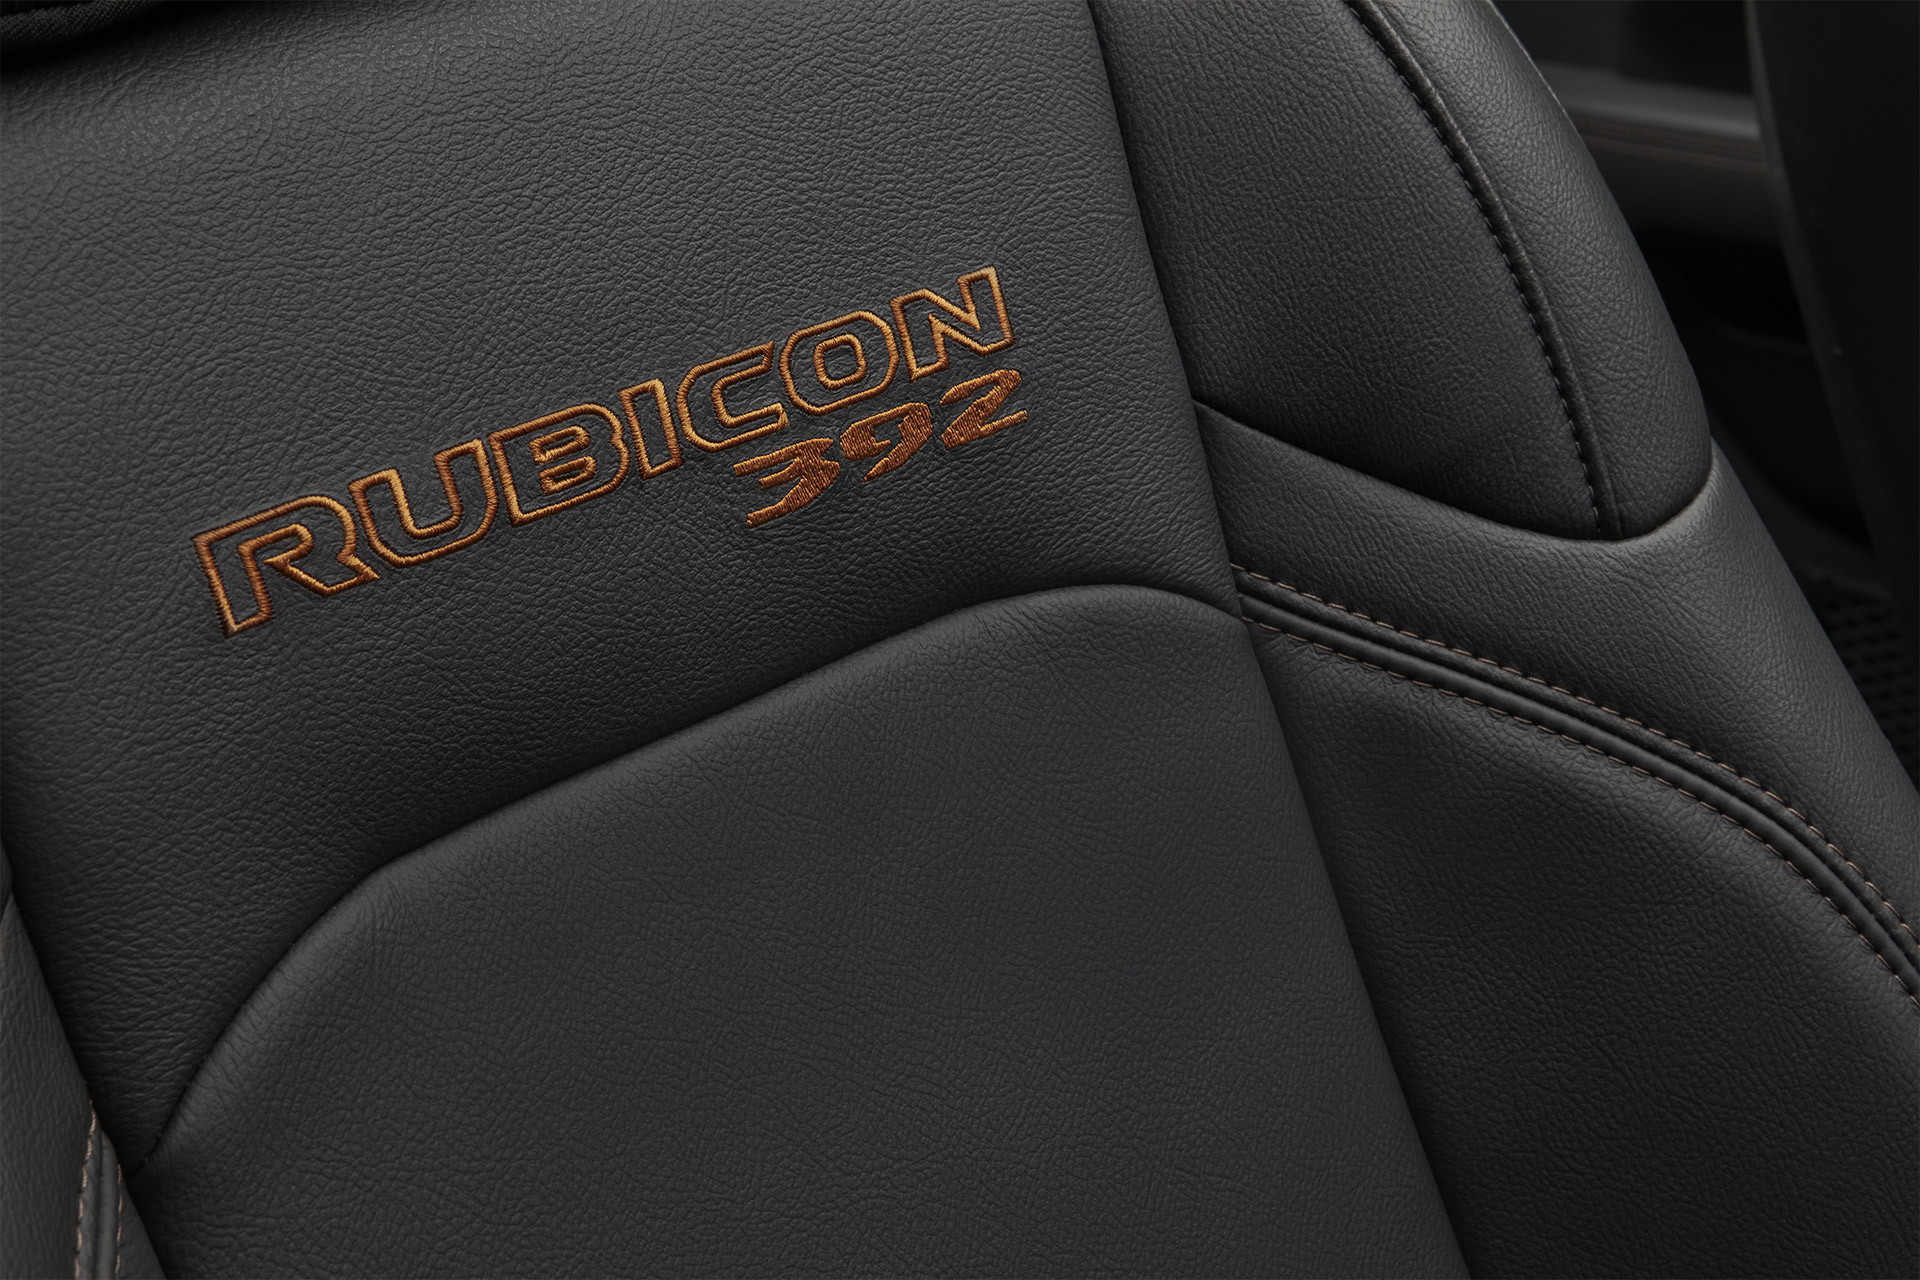 Close up of the Jeep Wrangler Rubicon 392 leather trimmed seats